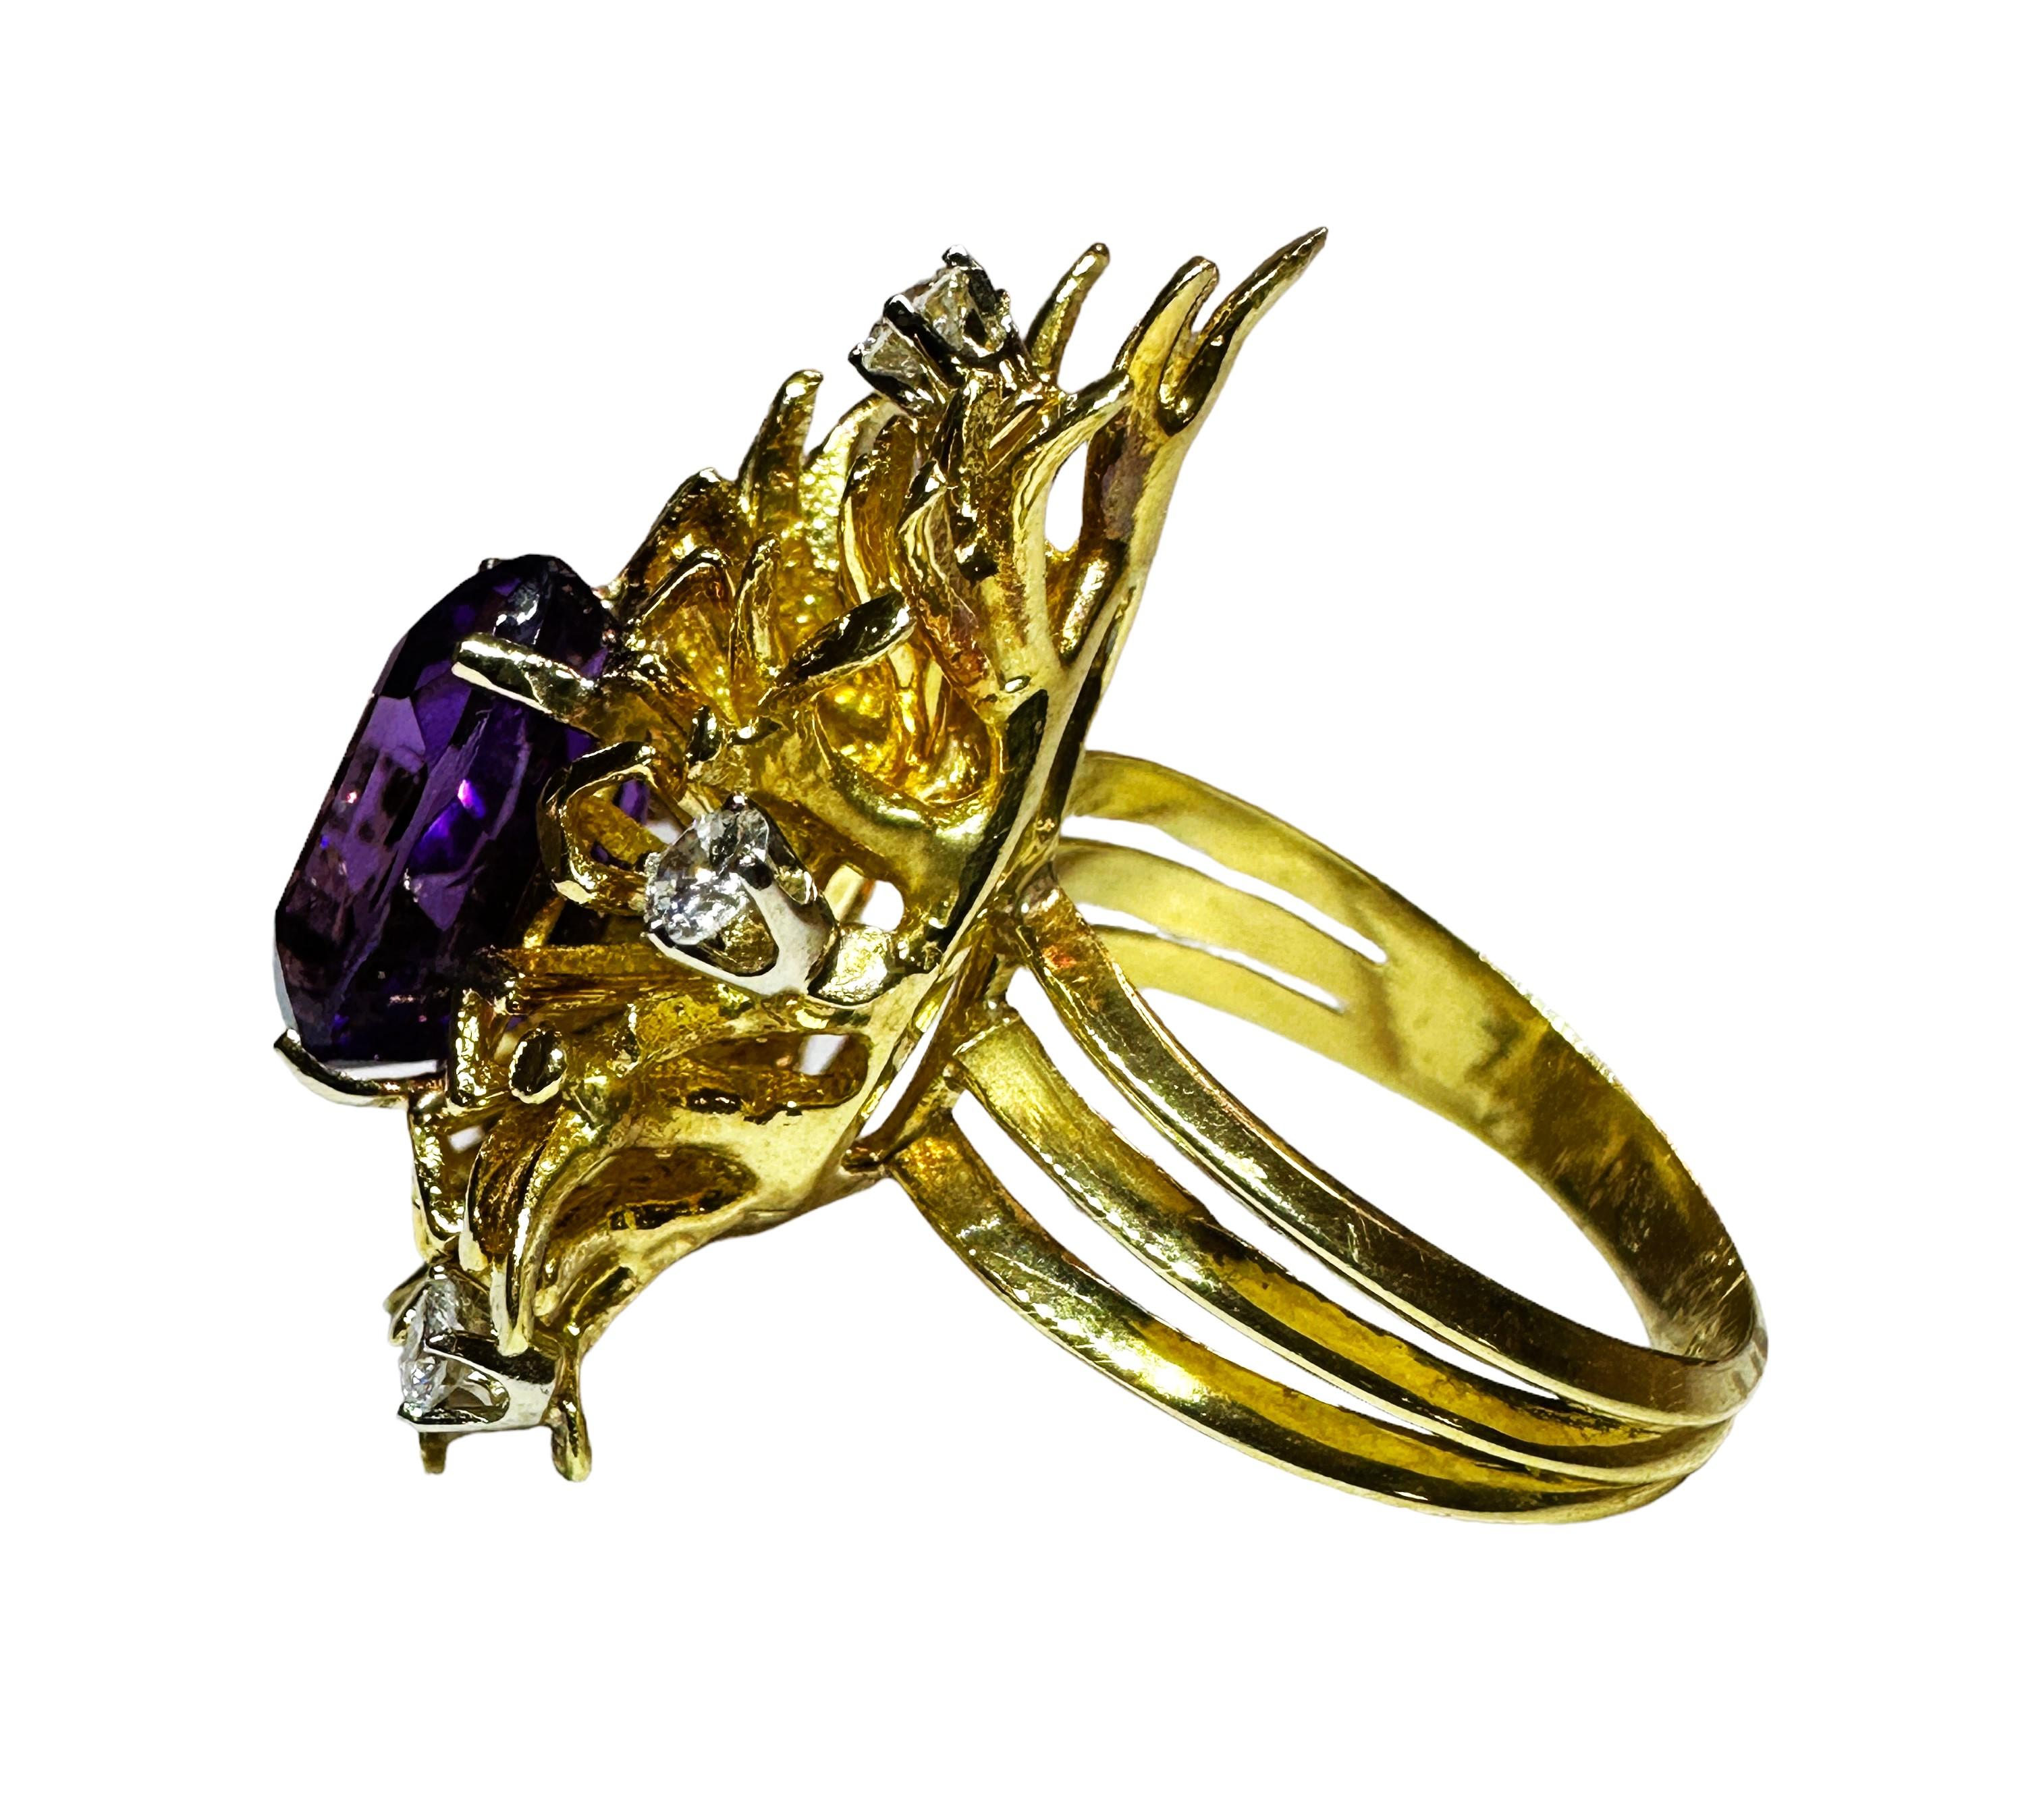 Art Nouveau 18K YG 4 Ct Amethyst & .25 Ct Diamond Ring Size 7.25 with Appraisal For Sale